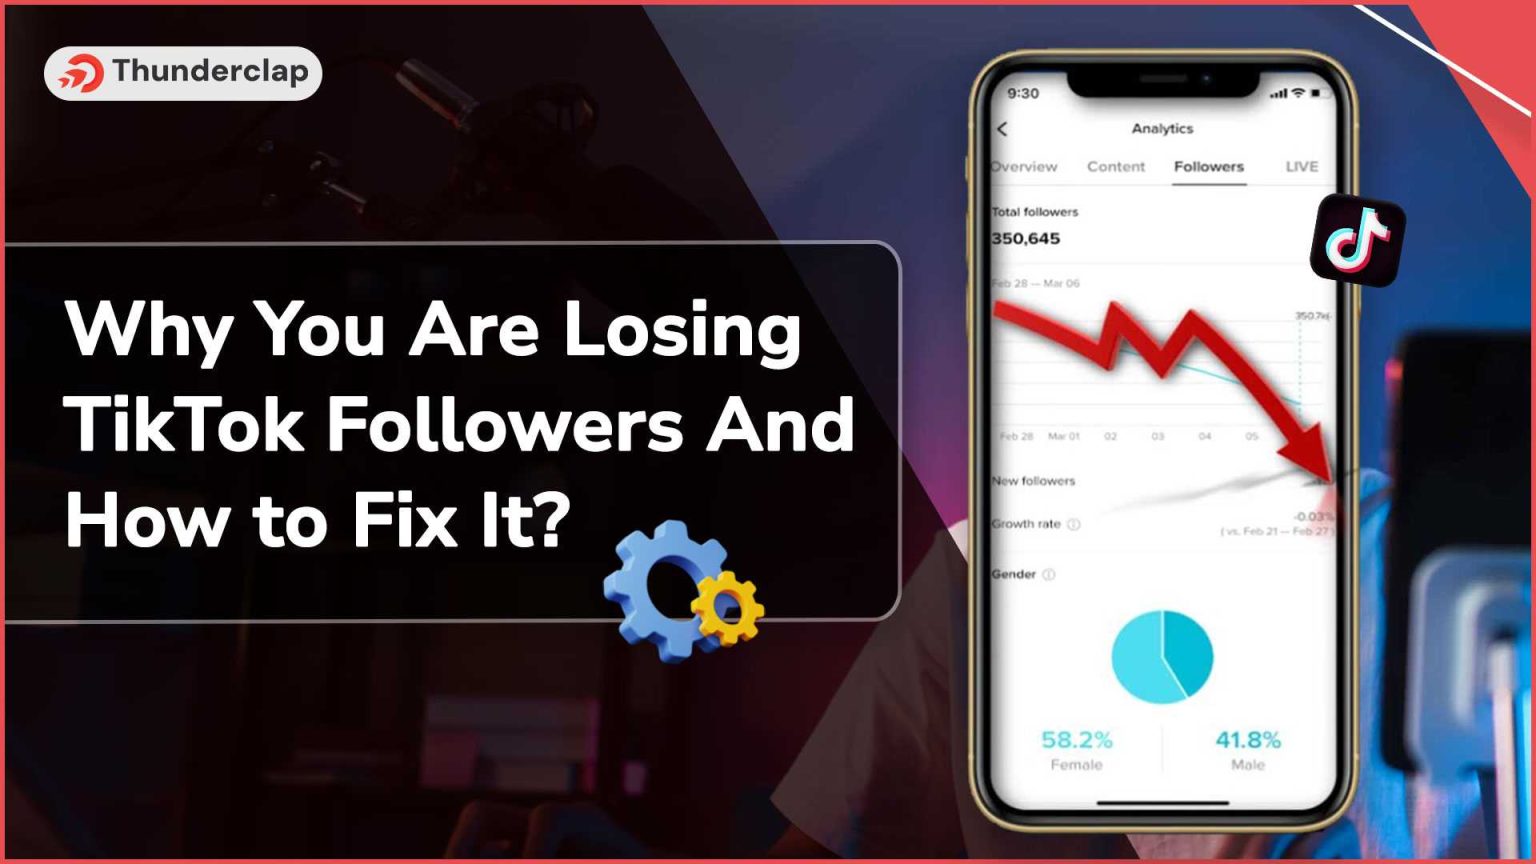 Why You Are Losing TikTok Followers And How to Fix It